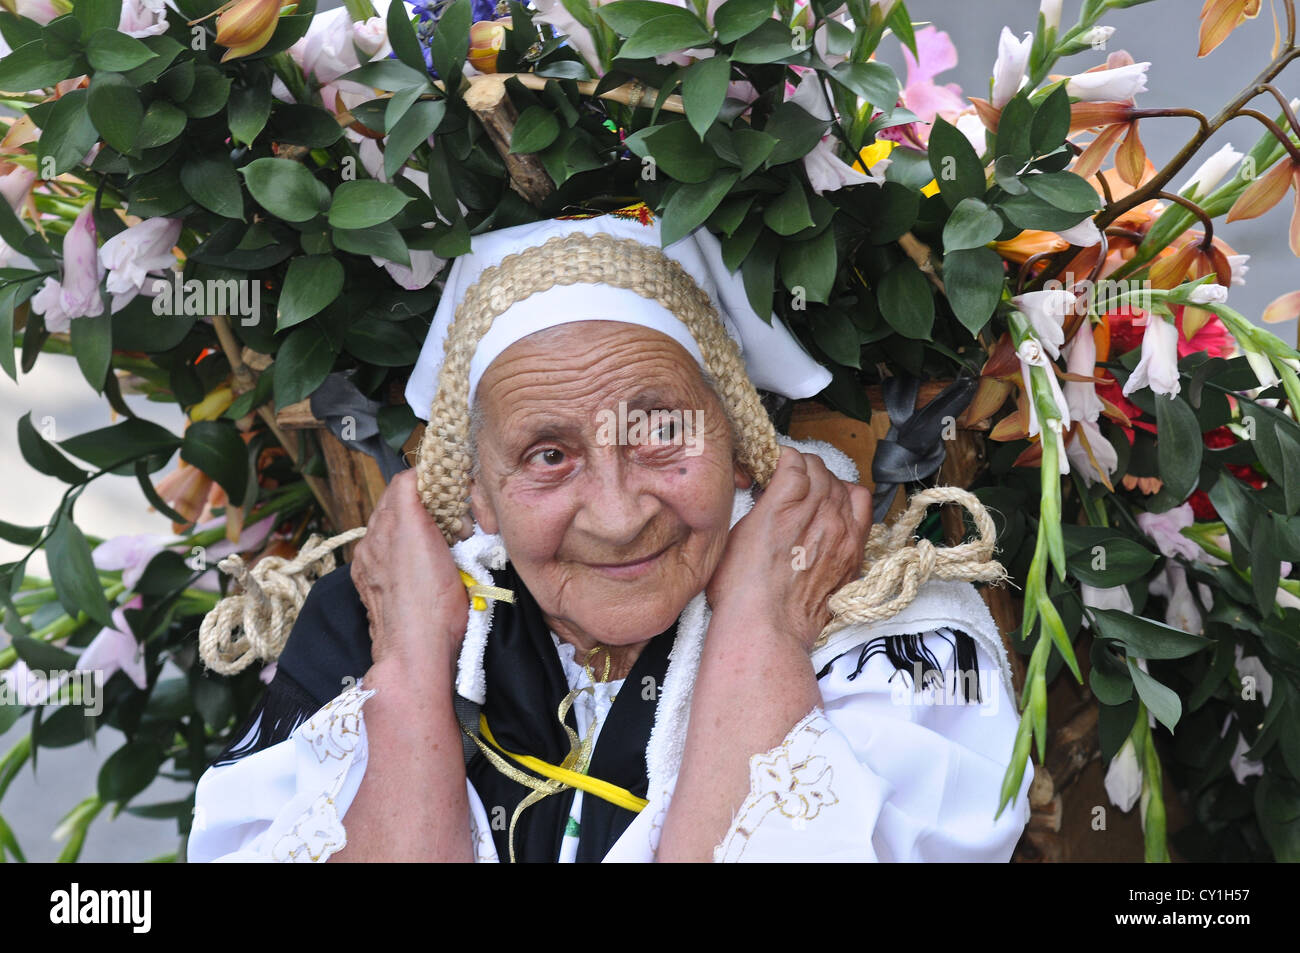 A peasant carries a heavy load of flowers from the mountains to sell. Stock Photo